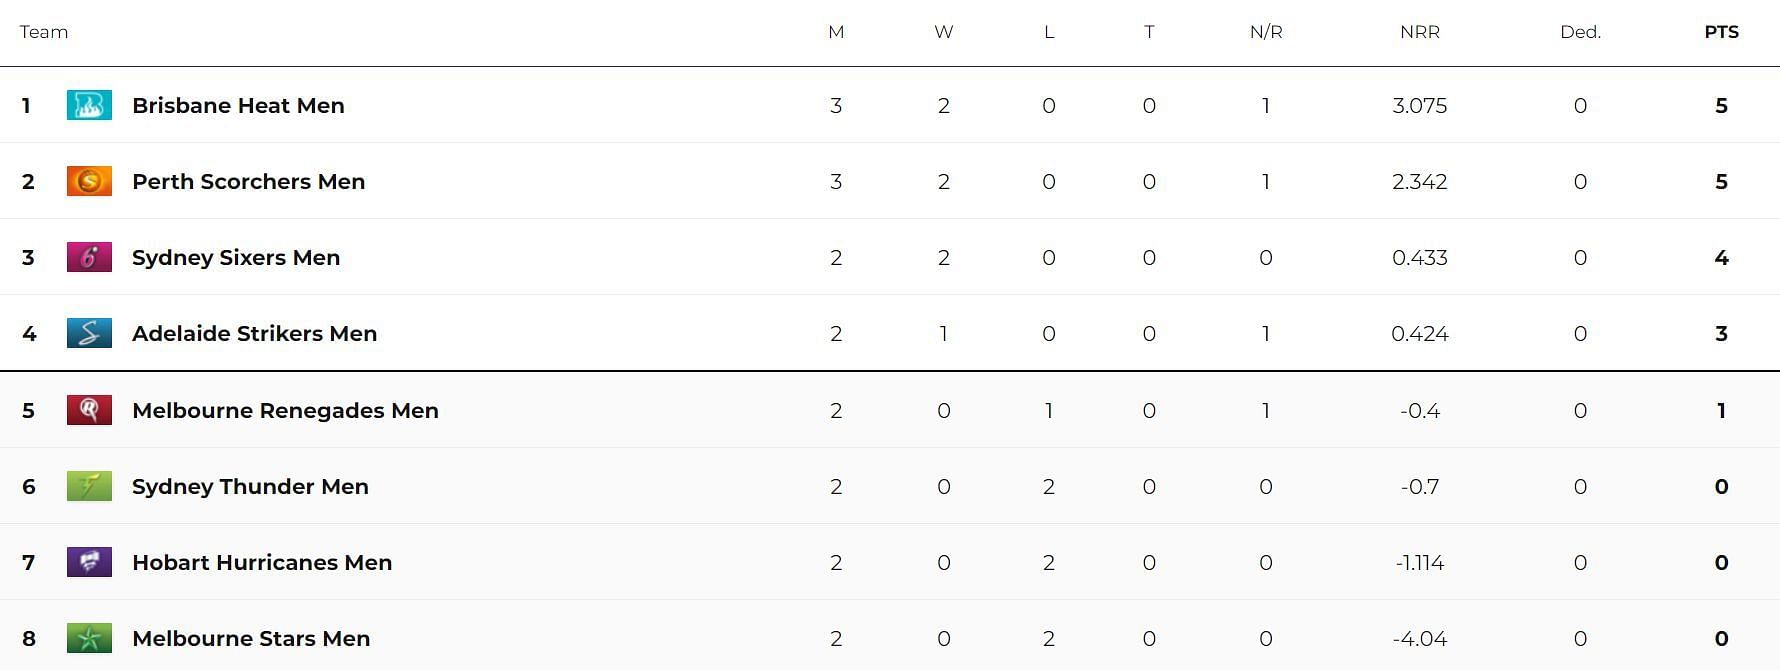 Updated Points Table after Match 9 (Image Courtesy: cricket.com.au)